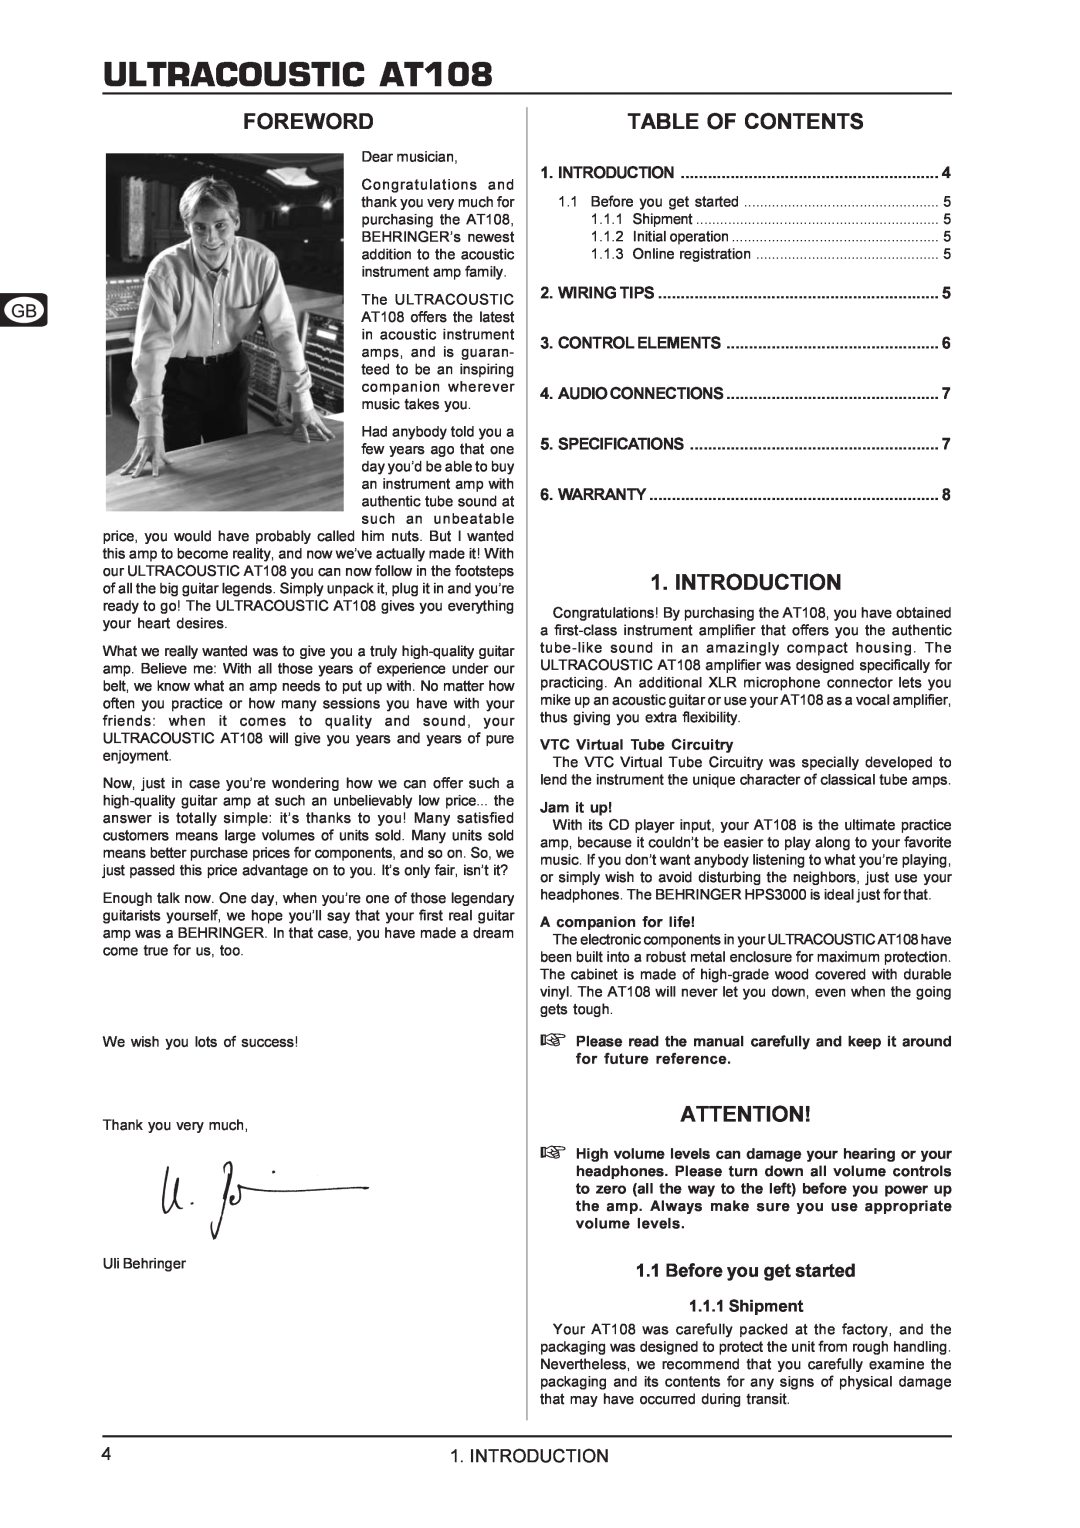 Behringer manual Foreword, Table Of Contents, Introduction, ULTRACOUSTIC AT108, 1.1Before you get started 